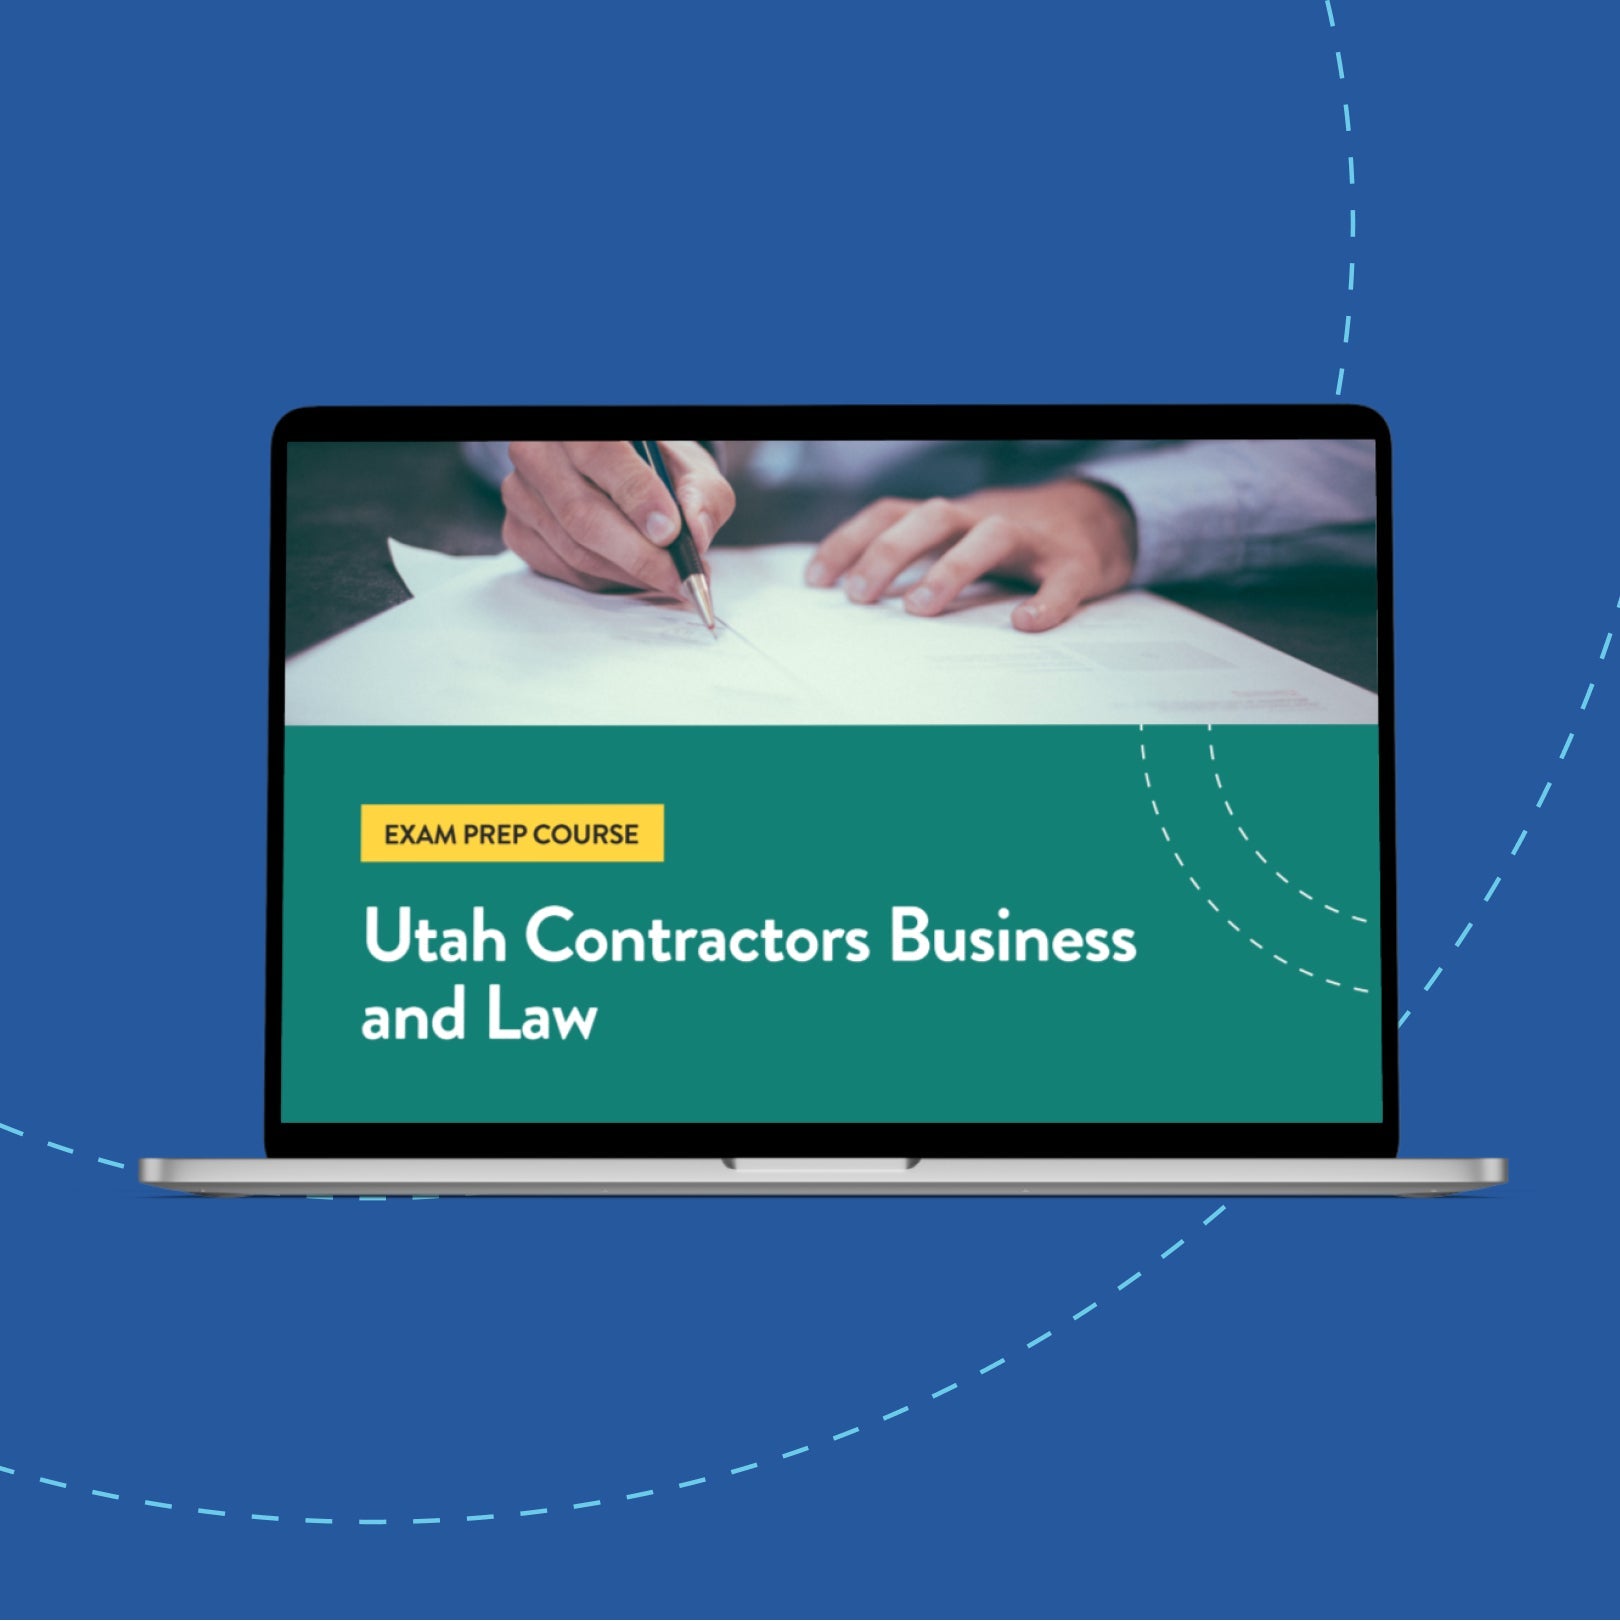 Utah Contractors Business and Law Exam Prep Course